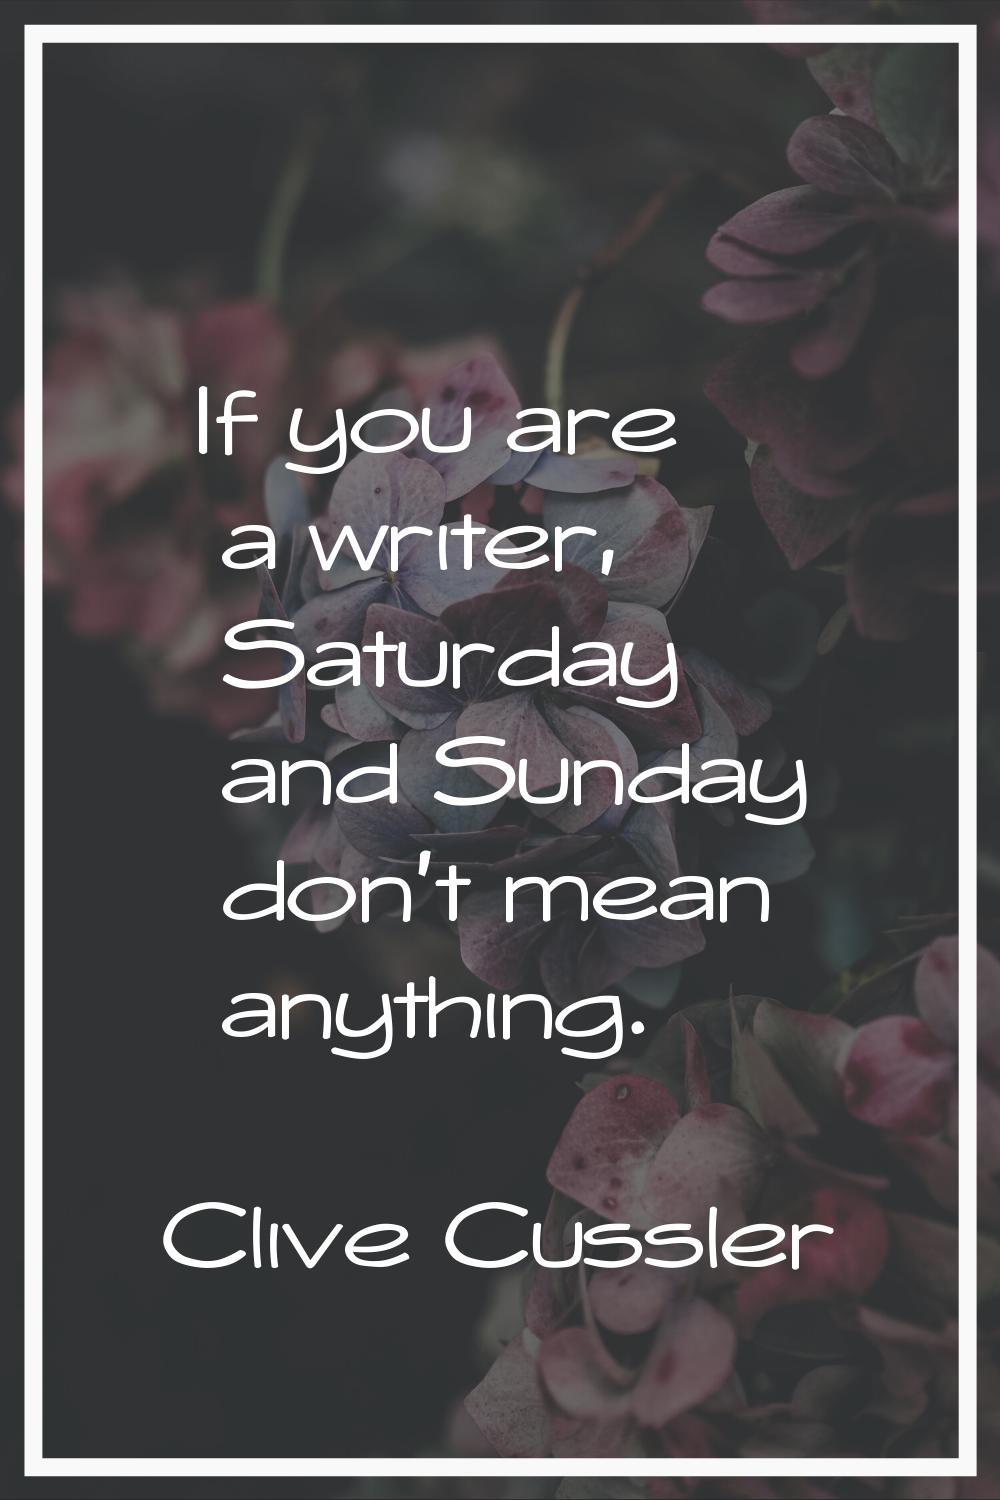 If you are a writer, Saturday and Sunday don't mean anything.